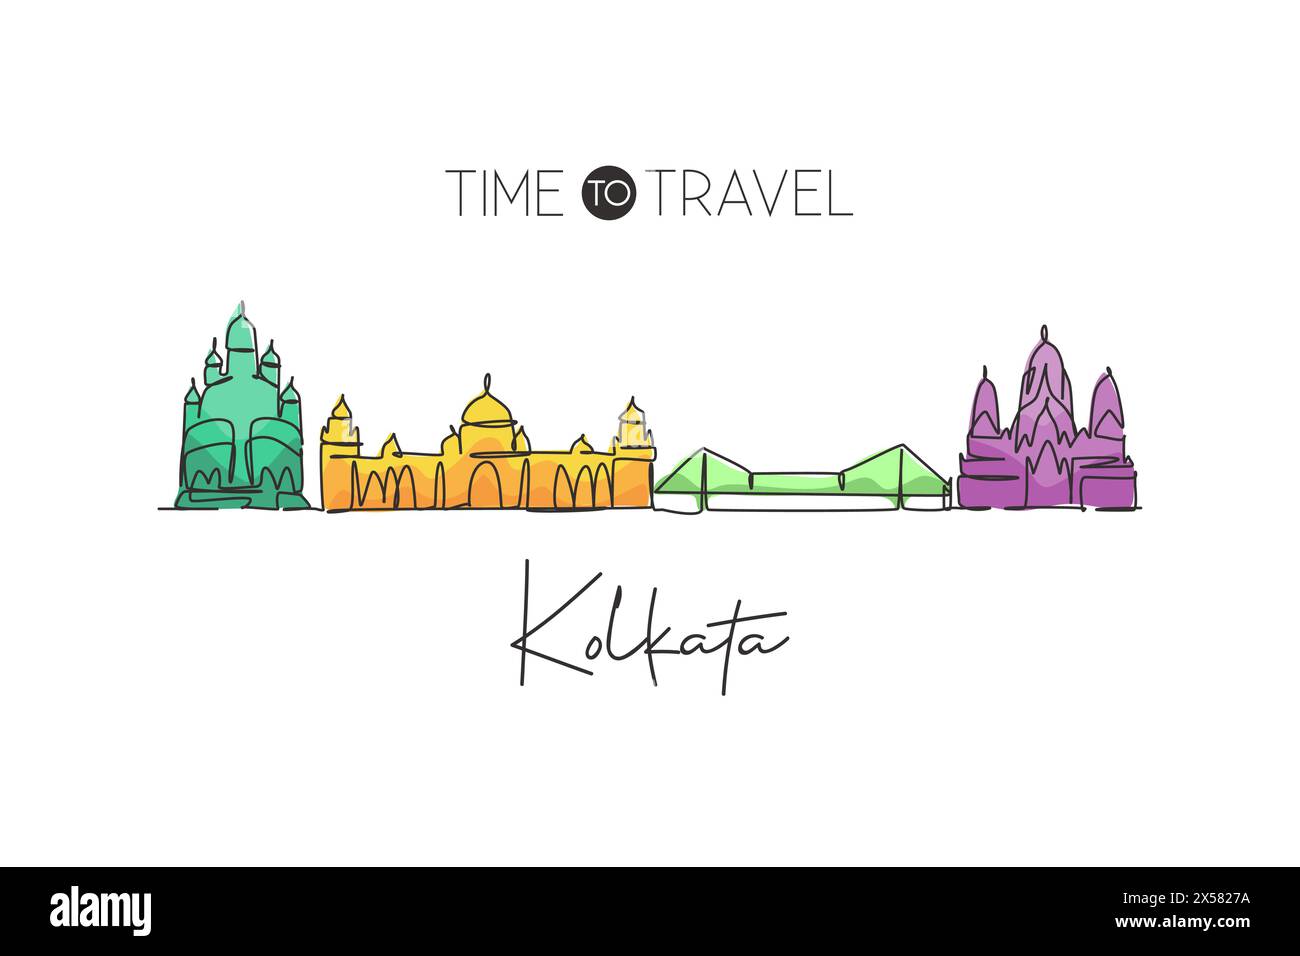 Single continuous line drawing of Kolkata city skyline, India. Famous city scraper and landscape home decor wall art poster print. World travel concep Stock Vector